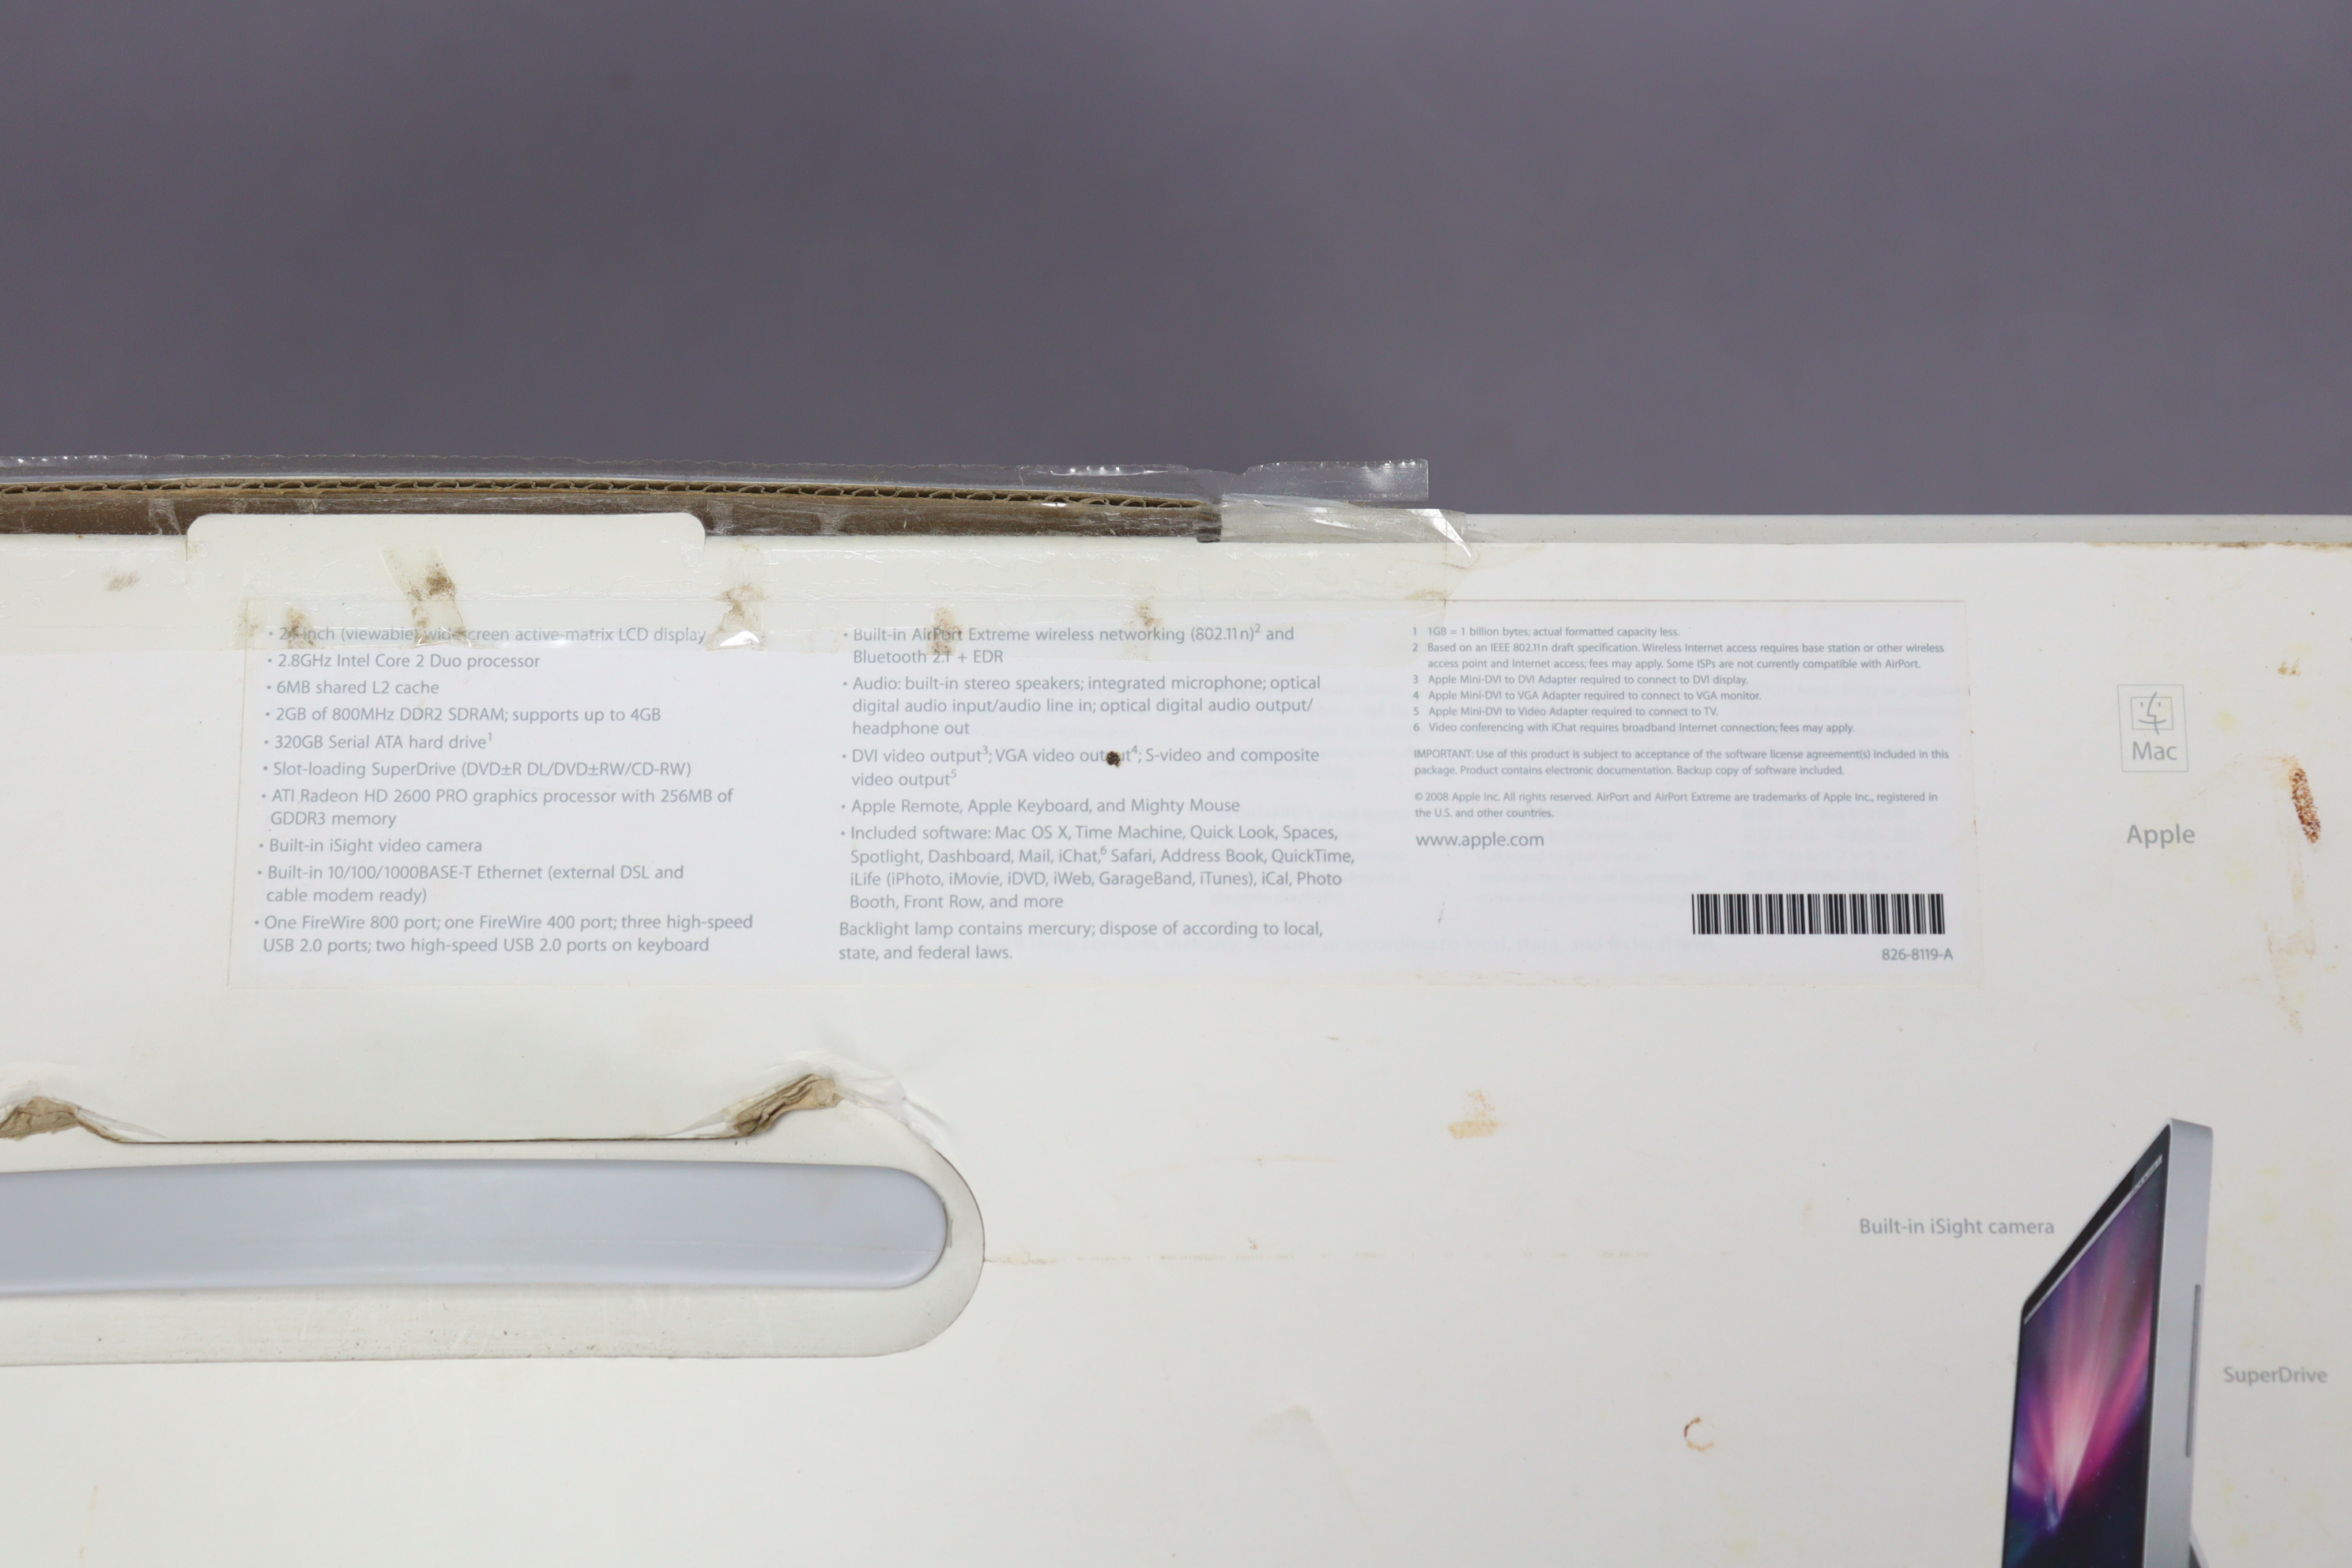 An Apple “Imac” computer, boxed. - Image 7 of 7